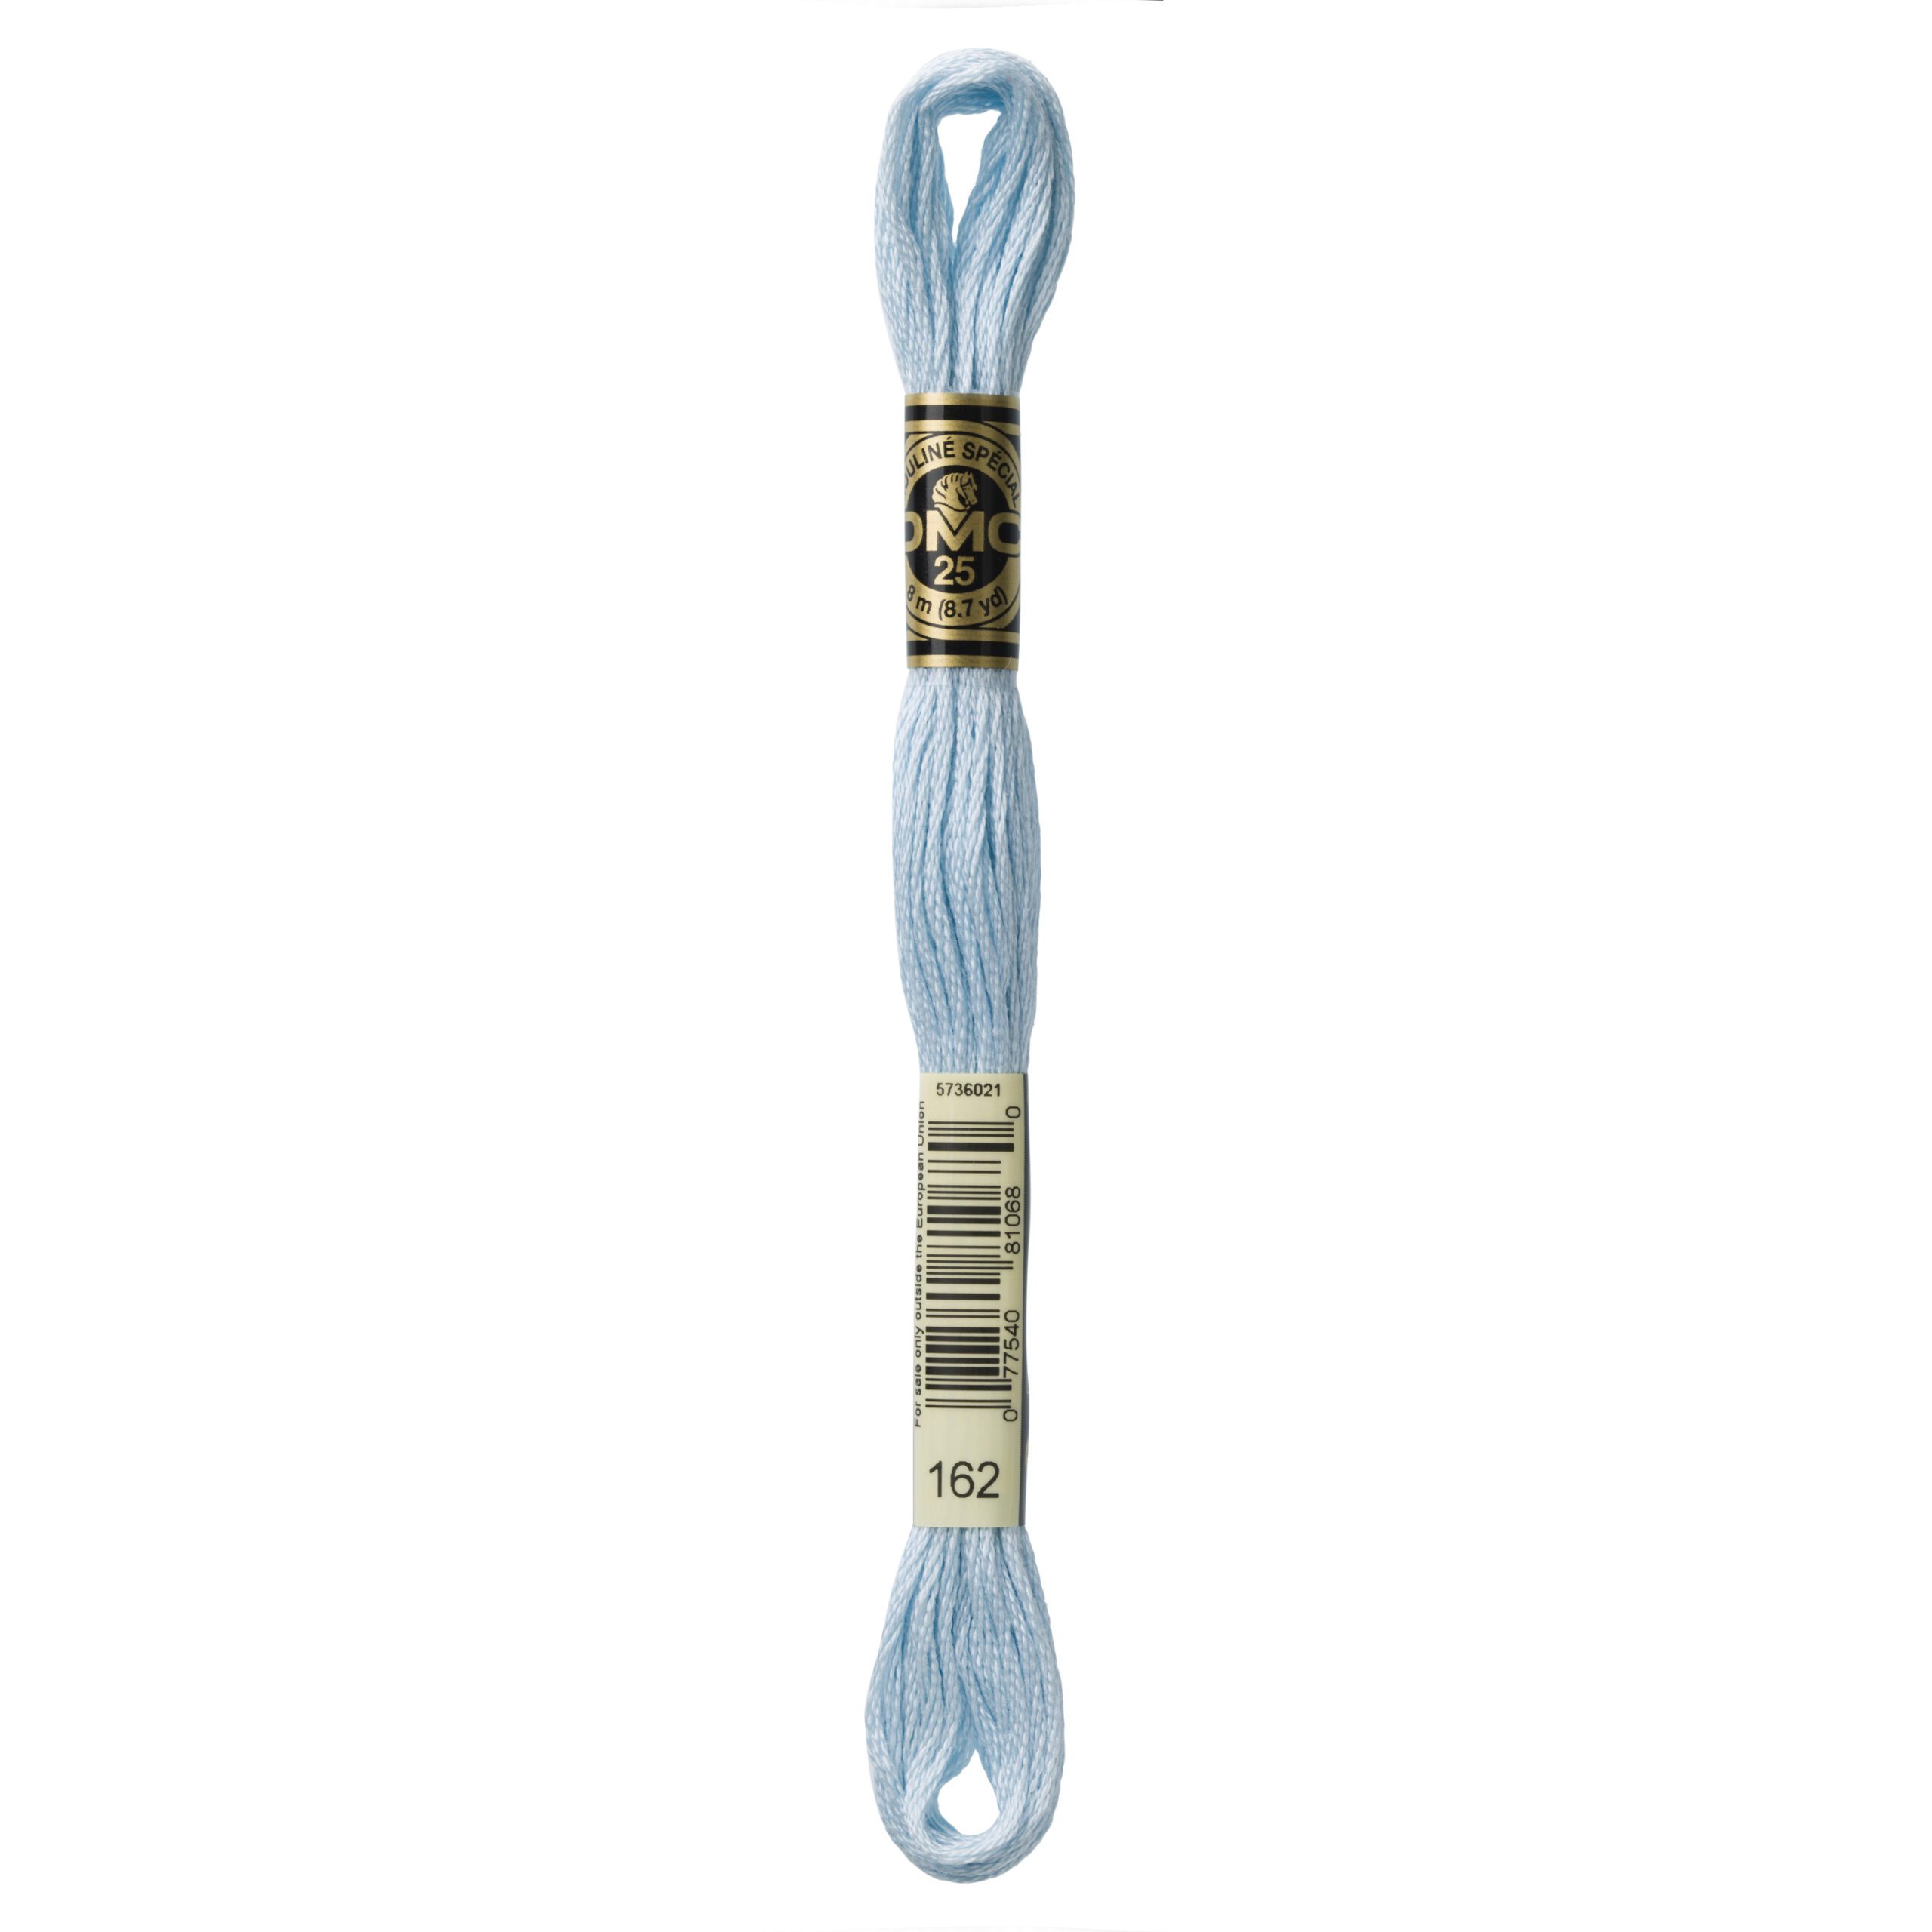 The Urban Store Embroidery Thread Ultra Very Light Blue DMC 988 RRP £1.40 CLEARANCE XL 99p